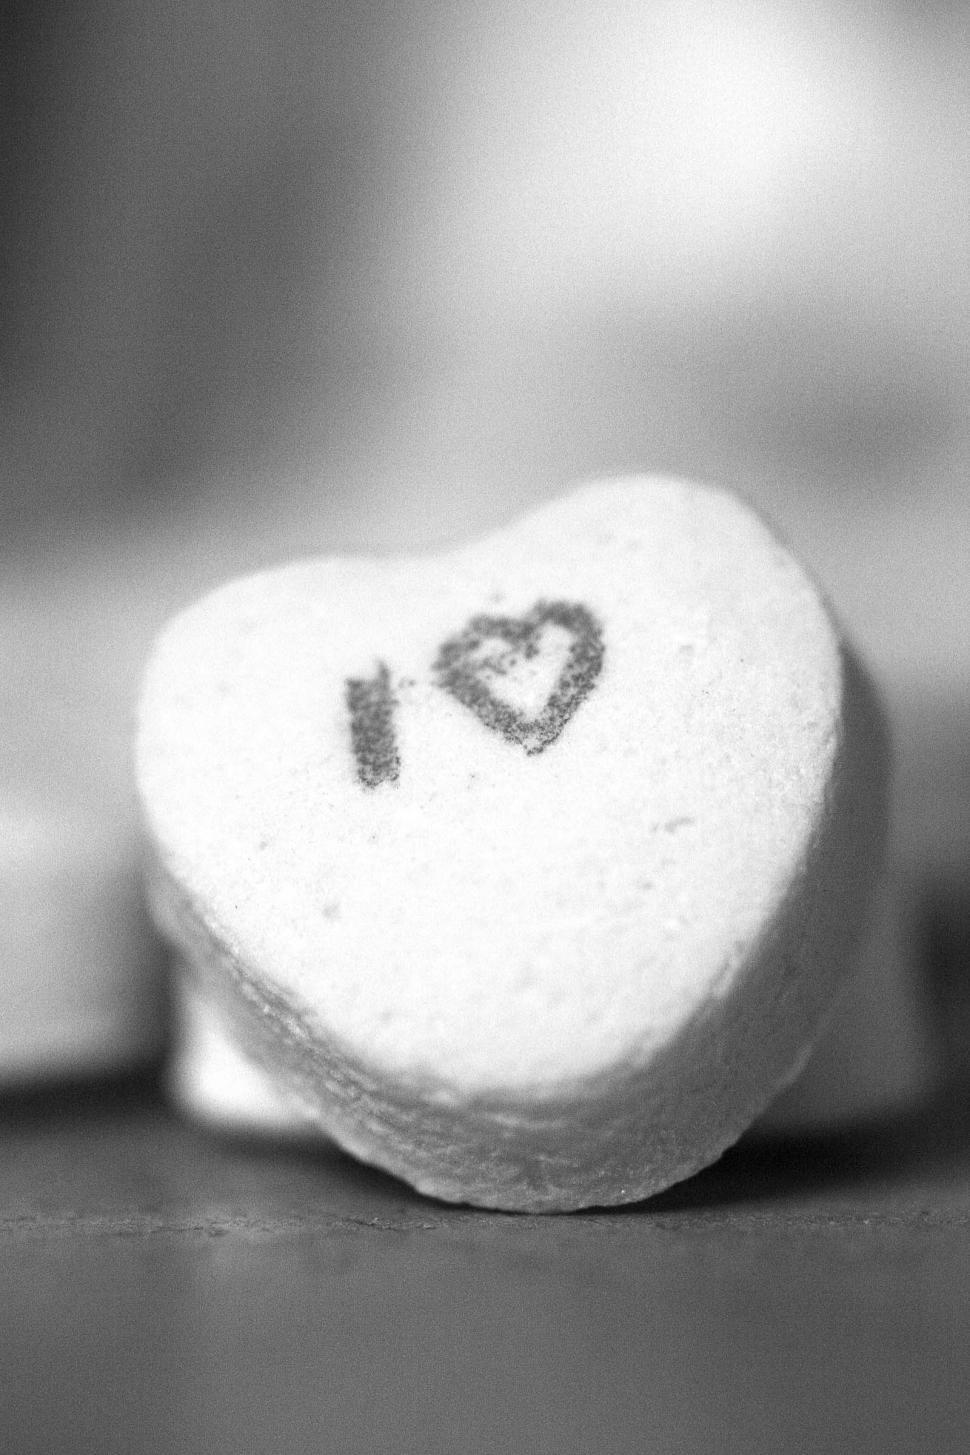 Free Image of Black and white heart 